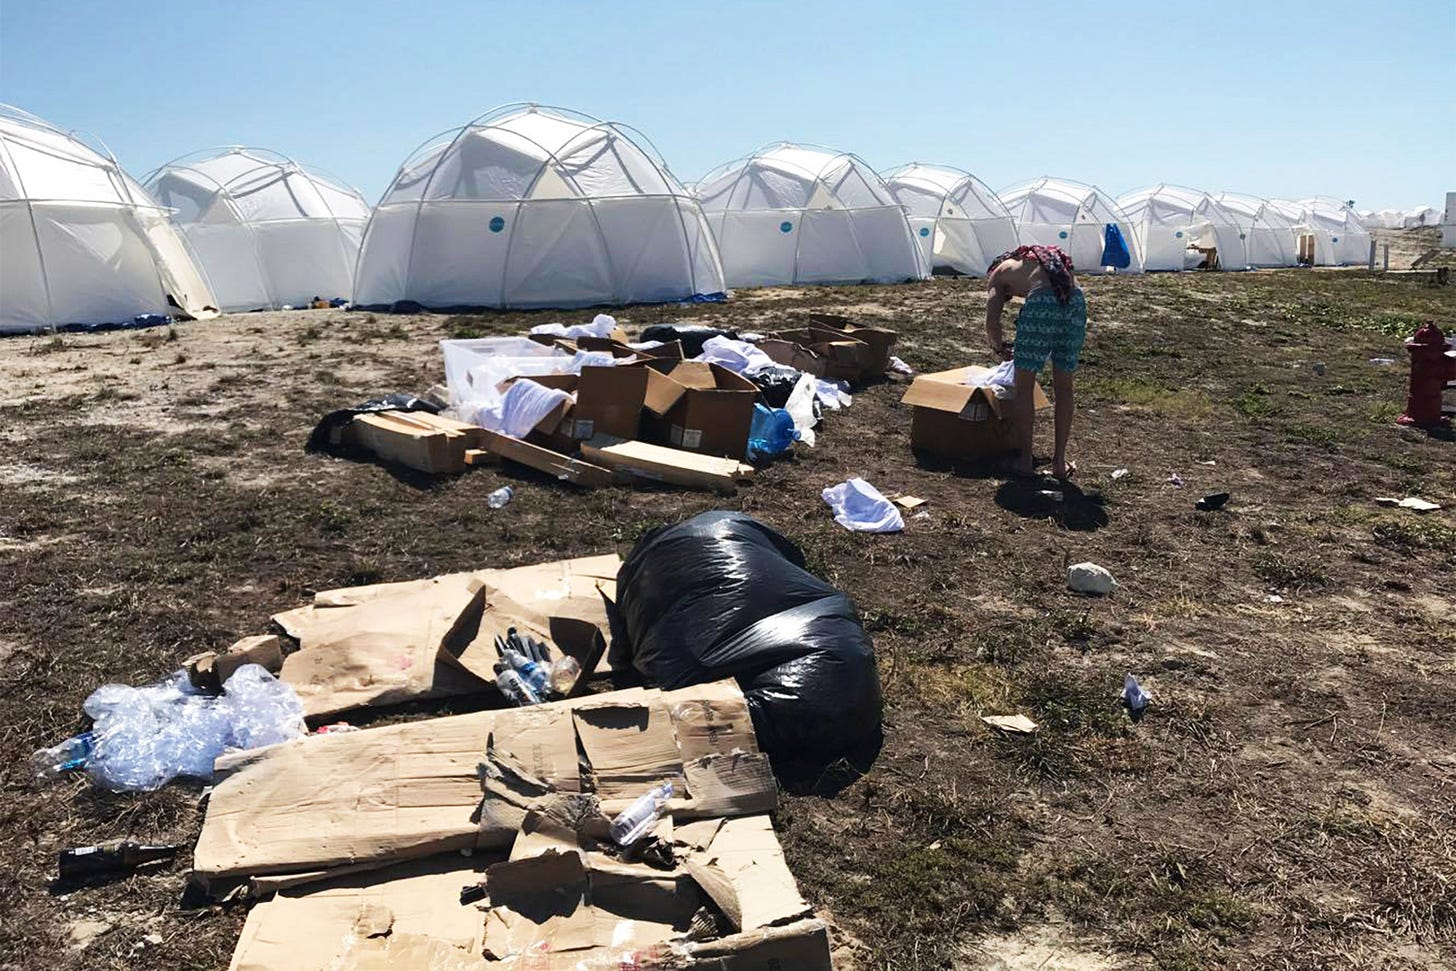 A group of white geodesic domes surrounded by garbage with a man picking through the tash.